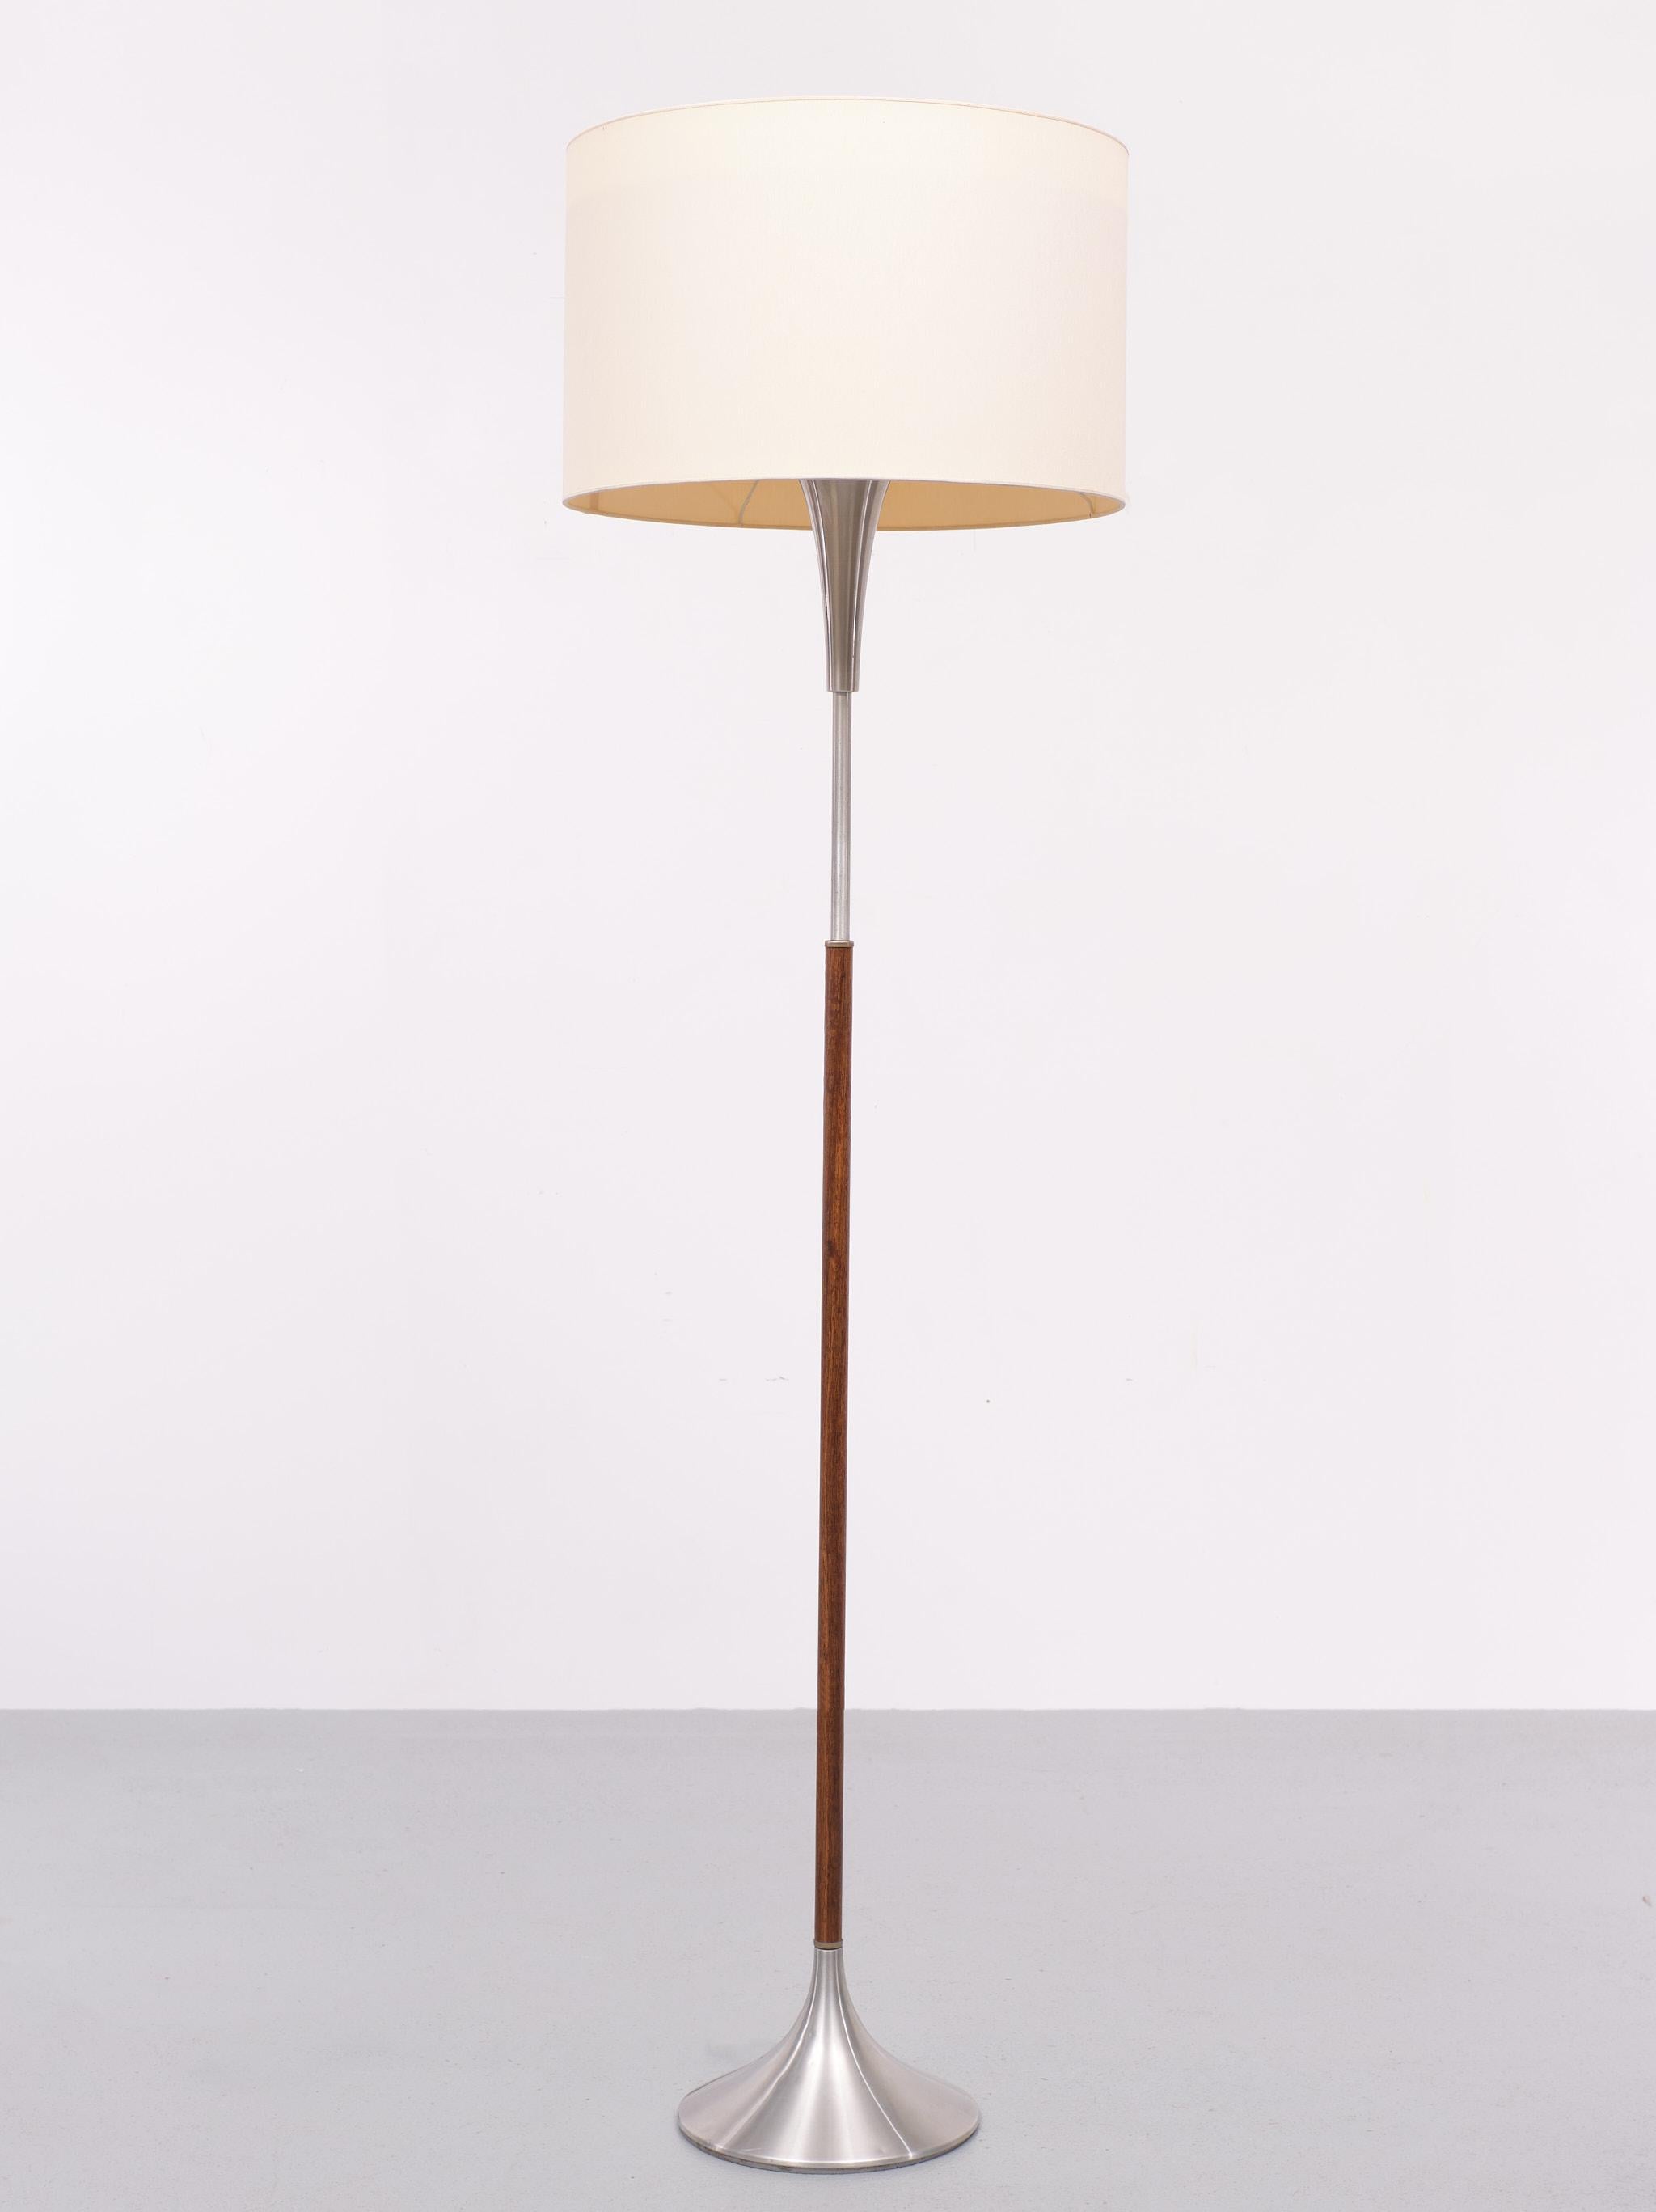 Stunning Floor lamp. Aluminum tulip shaped base. Teak rapping on the upright.
Comes with Four large E27 bulbs. One shining up and  the other down. foot switch.
Very nice large shade, in a off White color. Very good condition. Some small dents on the